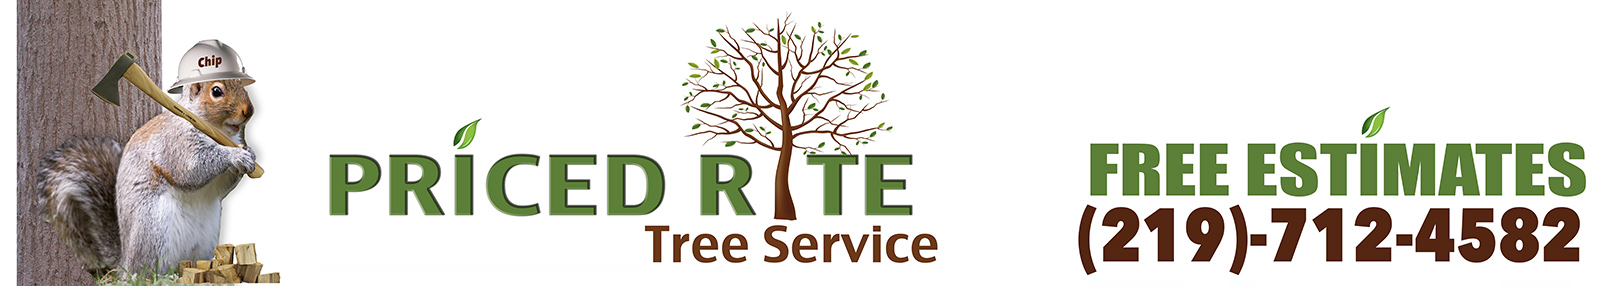 Priced Rite Tree Service of Northwest Indiana | Tree Removal | Tree Trimming | Stump Grinding